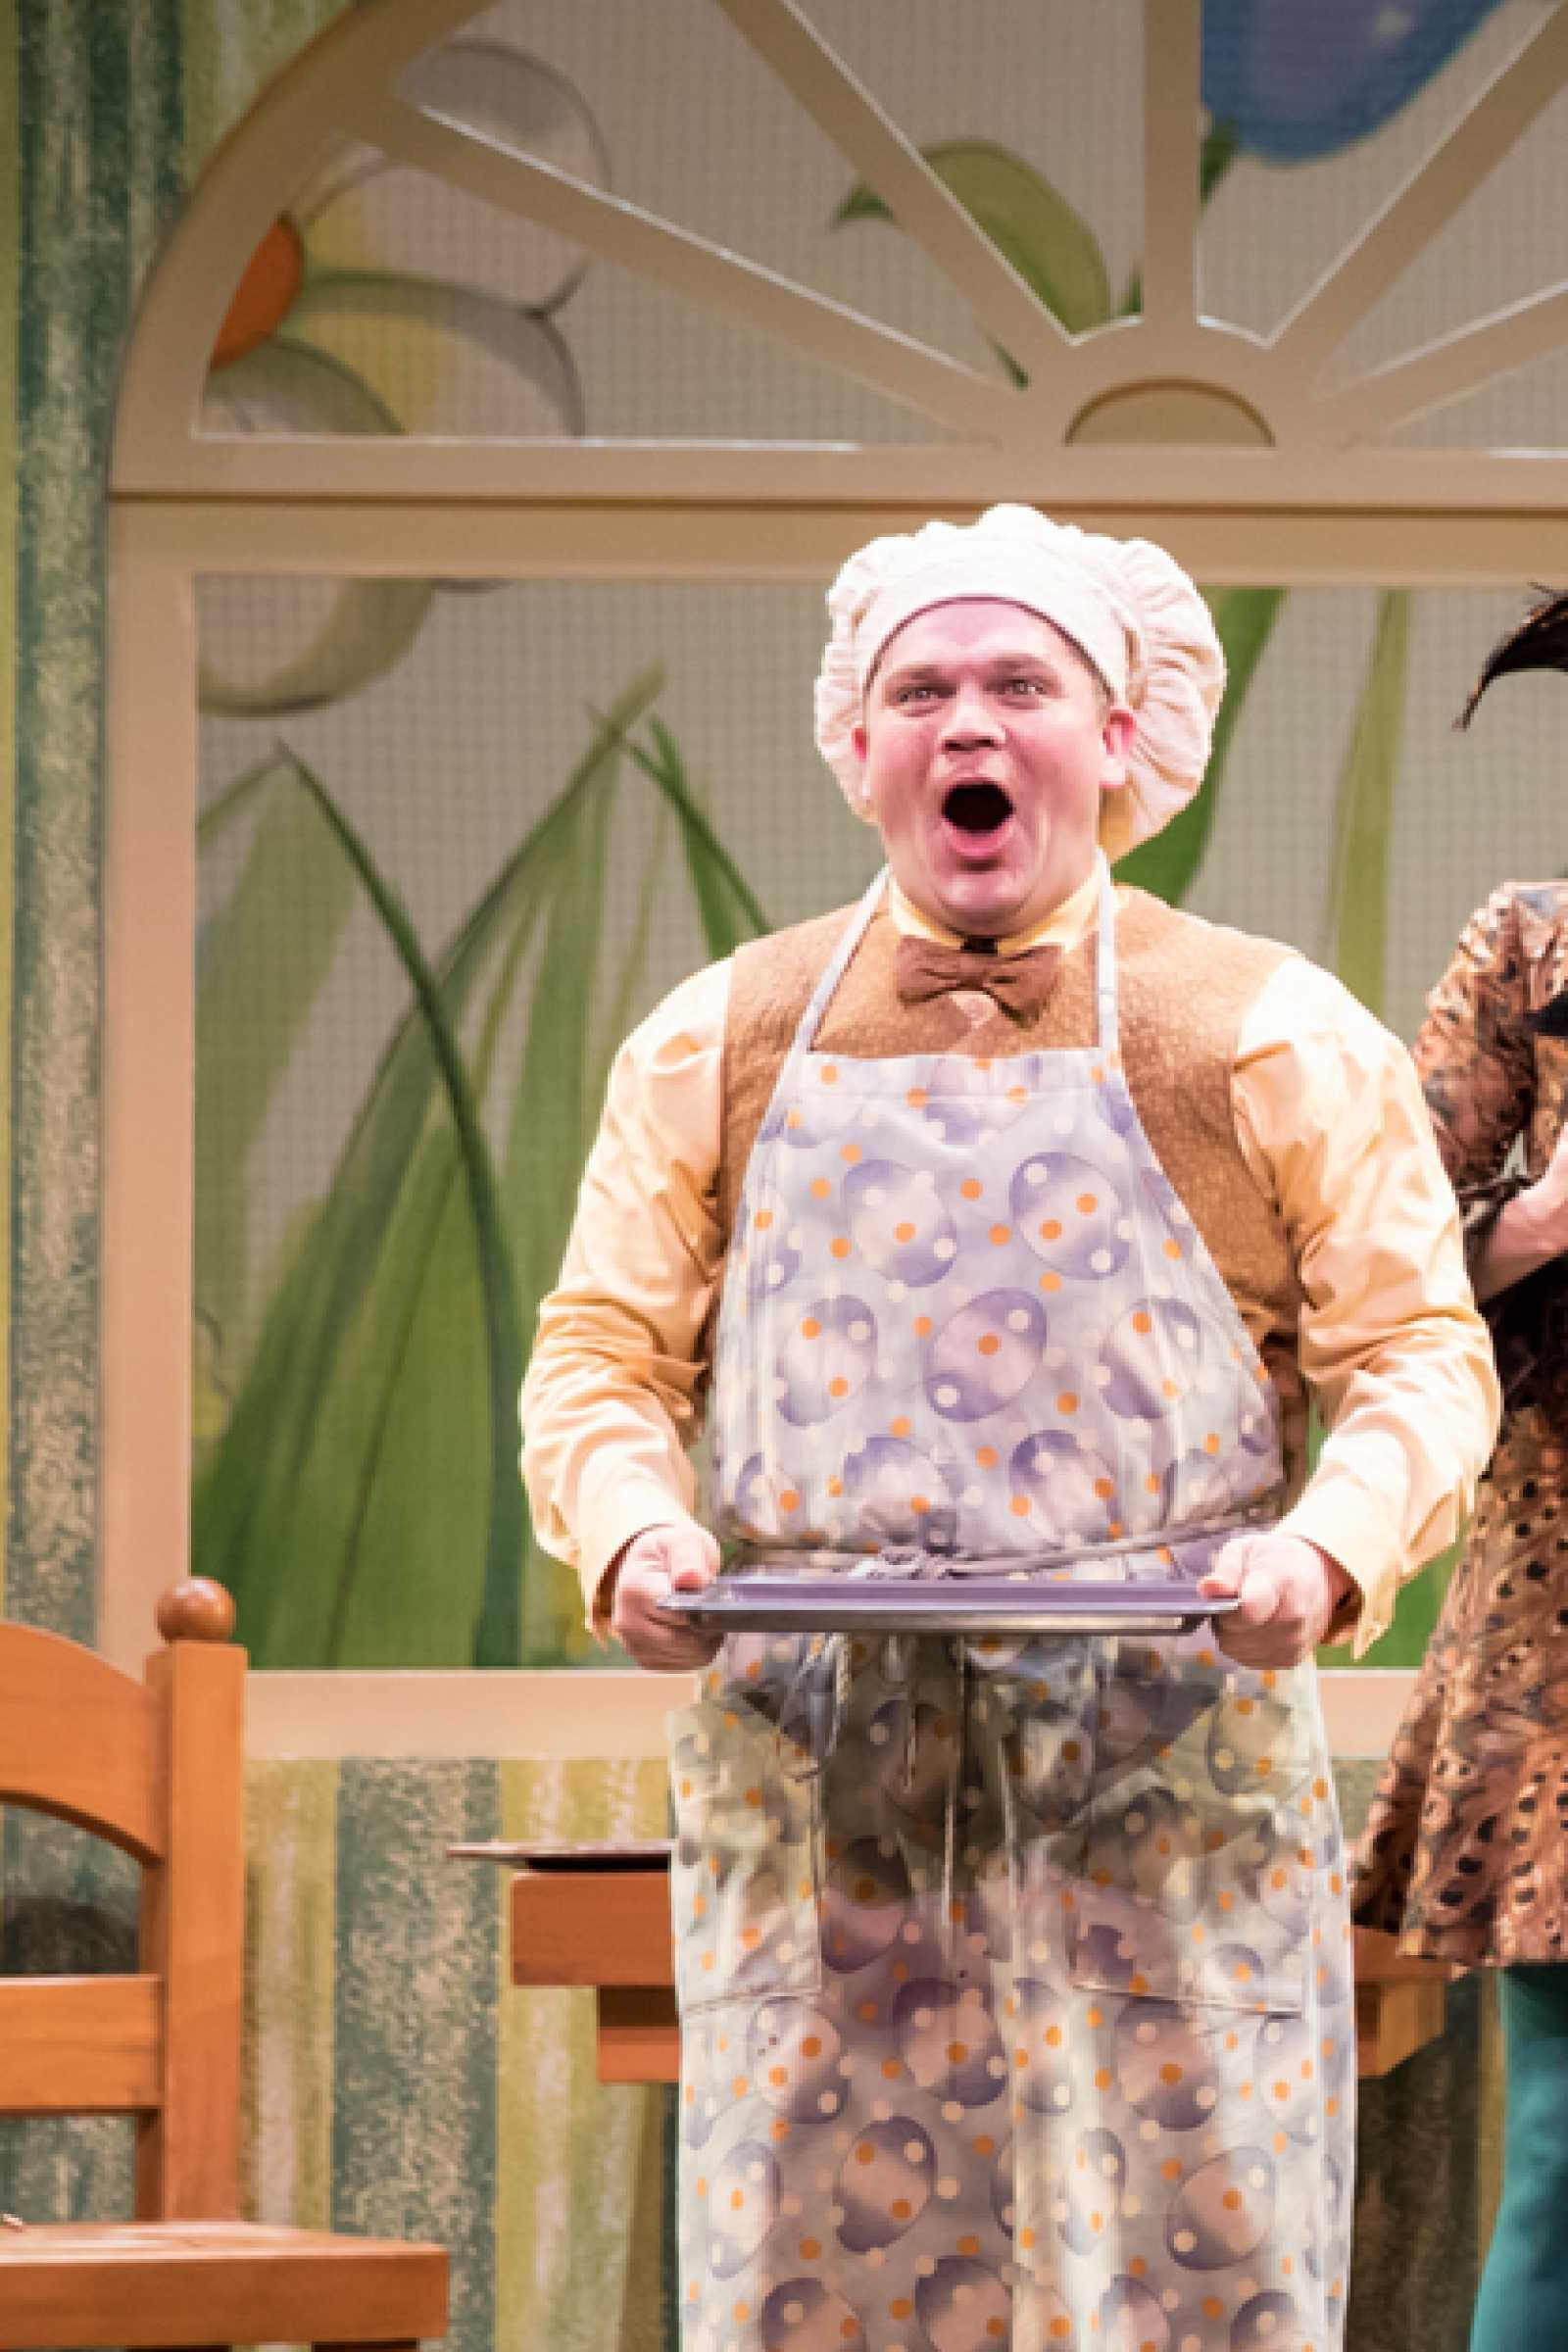 Broadway hit "A Year with Frog and Toad" returns to a Minneapolis stage